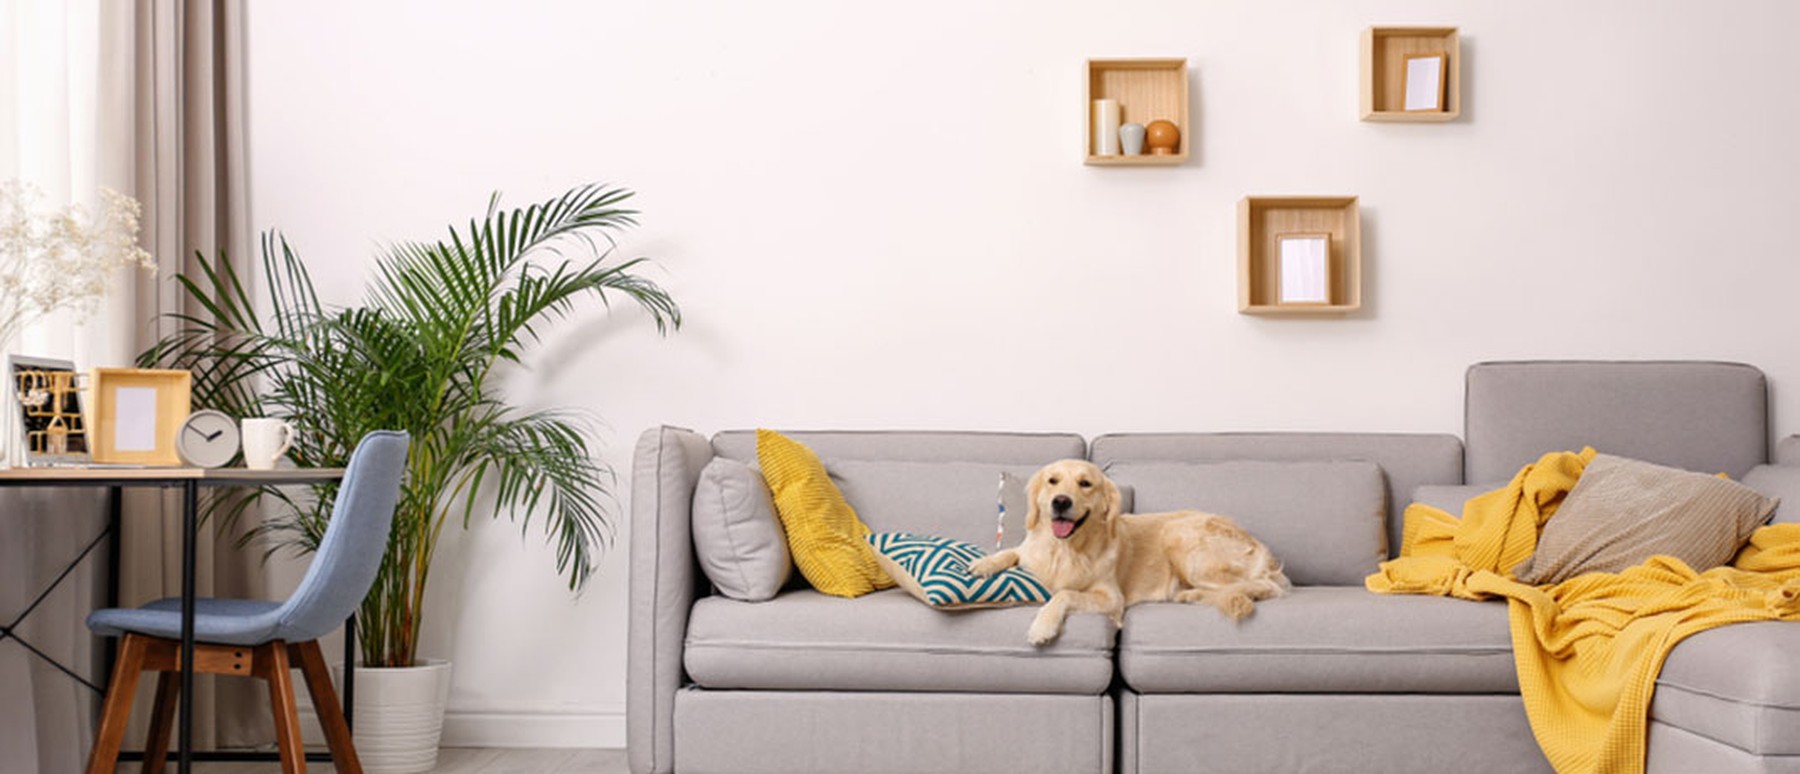 Golden Retriever on a living room couch